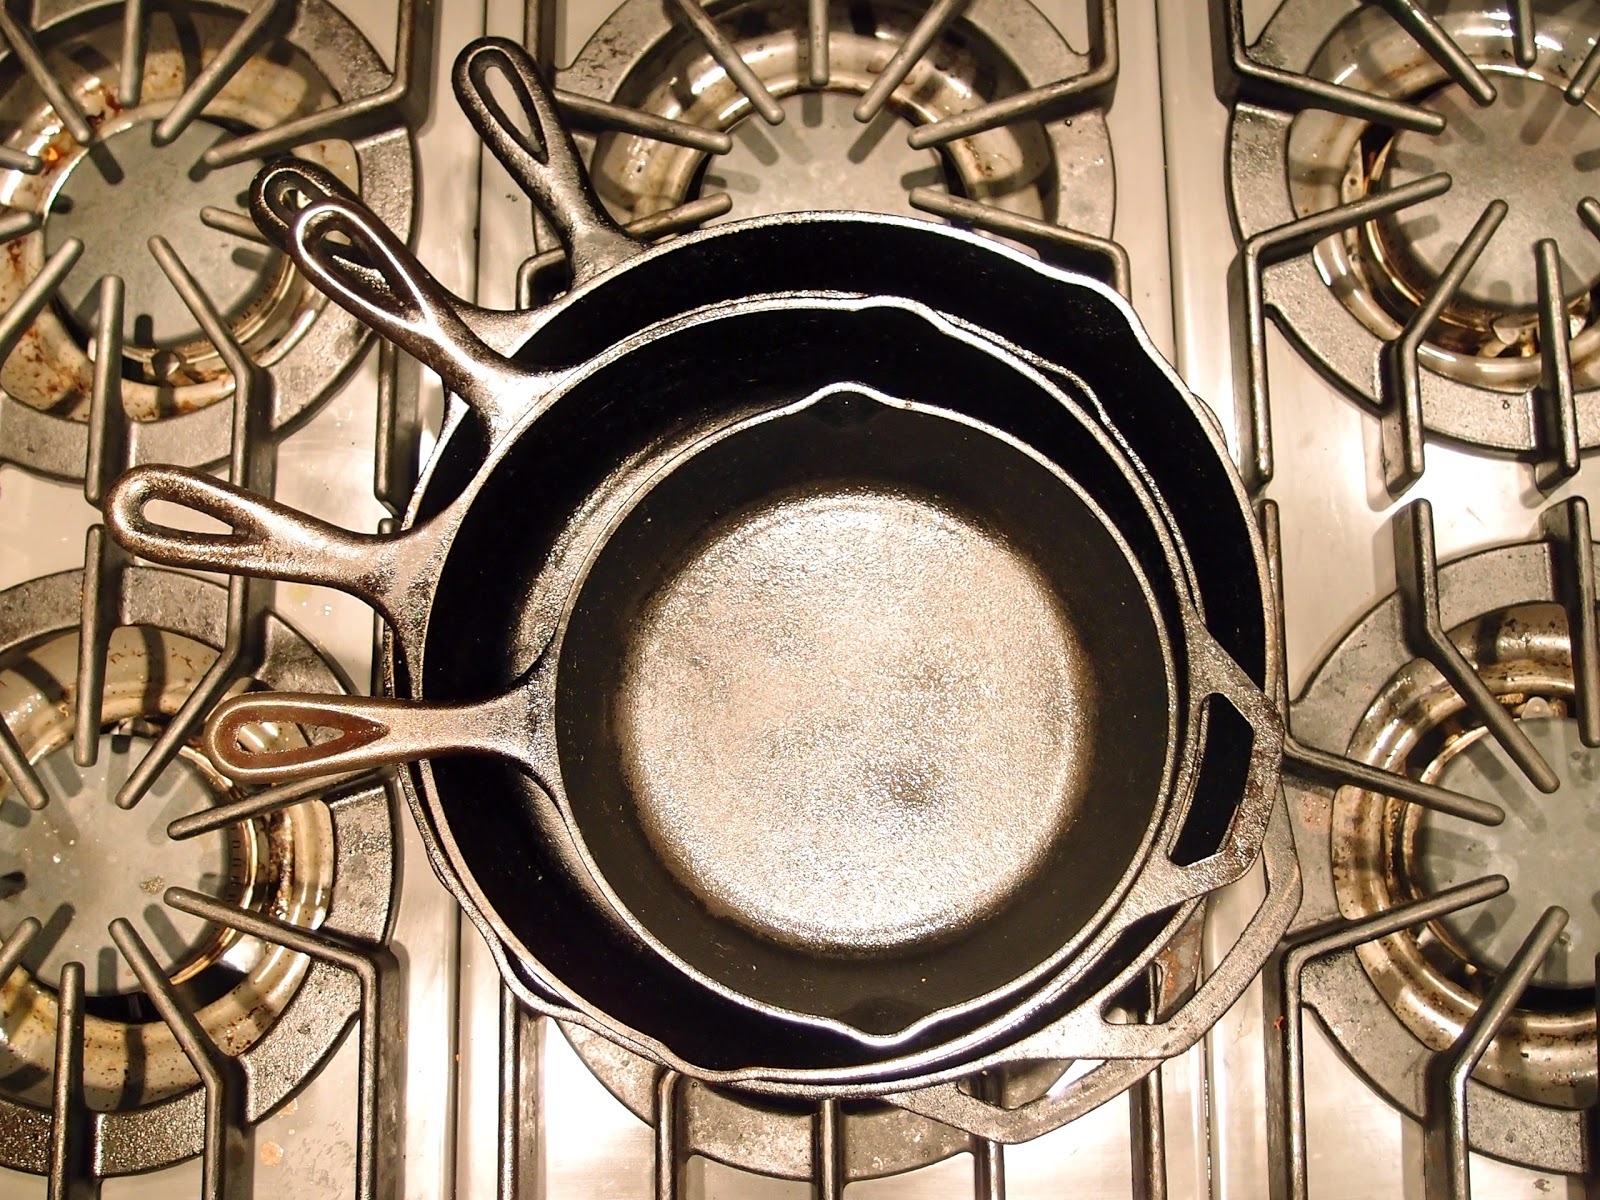 https://nwedible.com/wp-content/uploads/2011/03/Cast-Iron-On-Stove.jpg